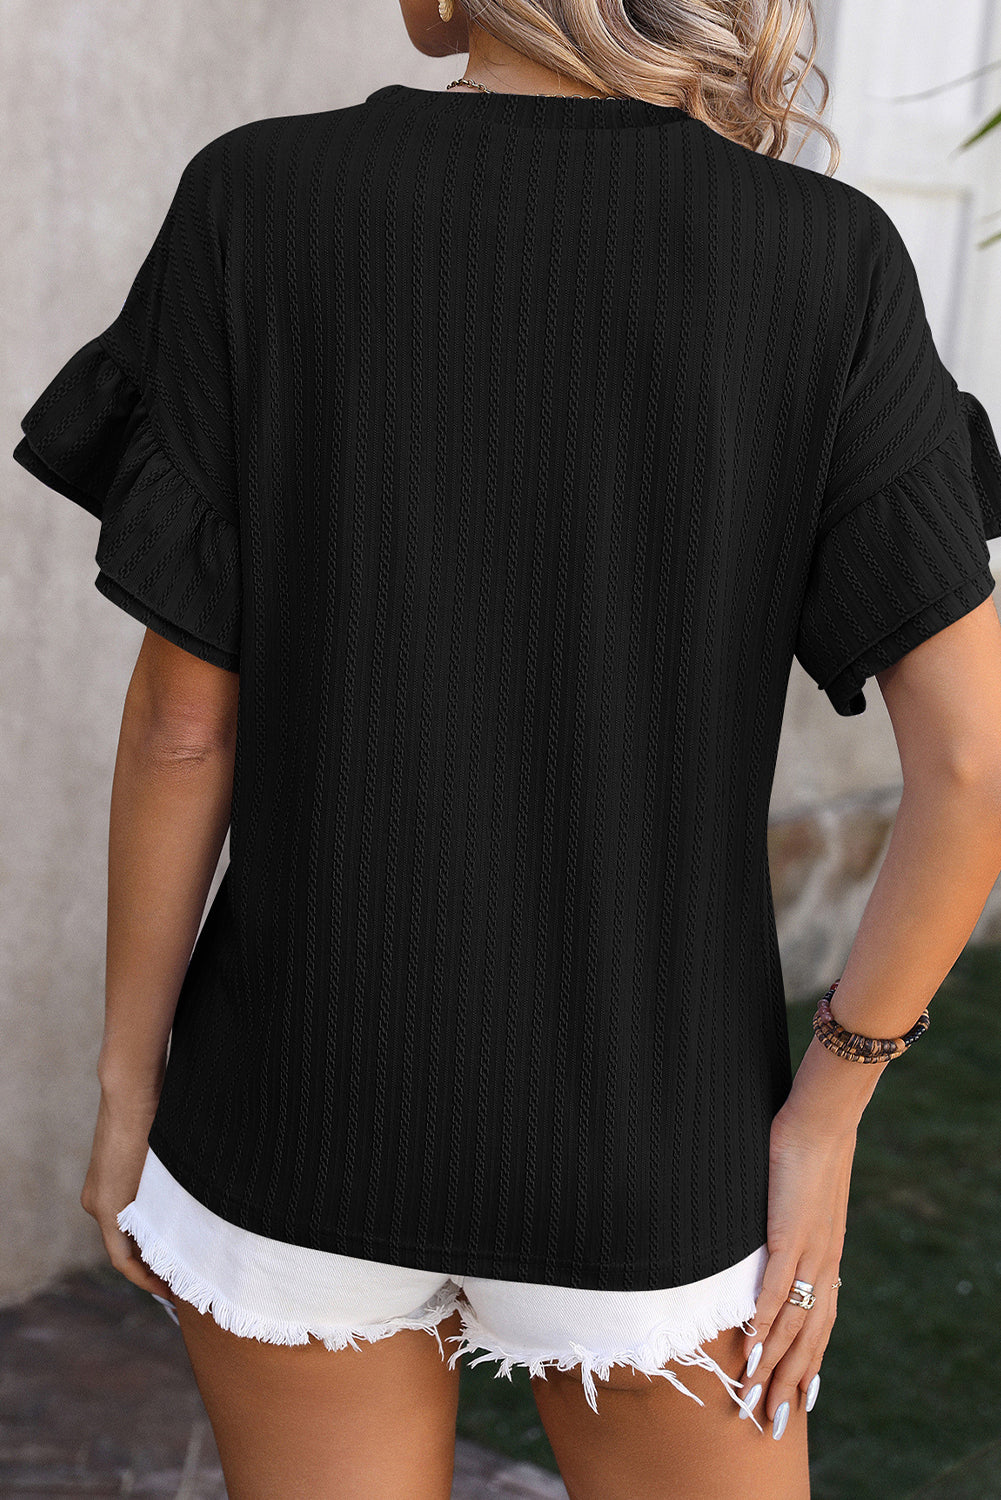 Black Solid Color Textured Layered Ruffle Sleeve T Shirt-ECB